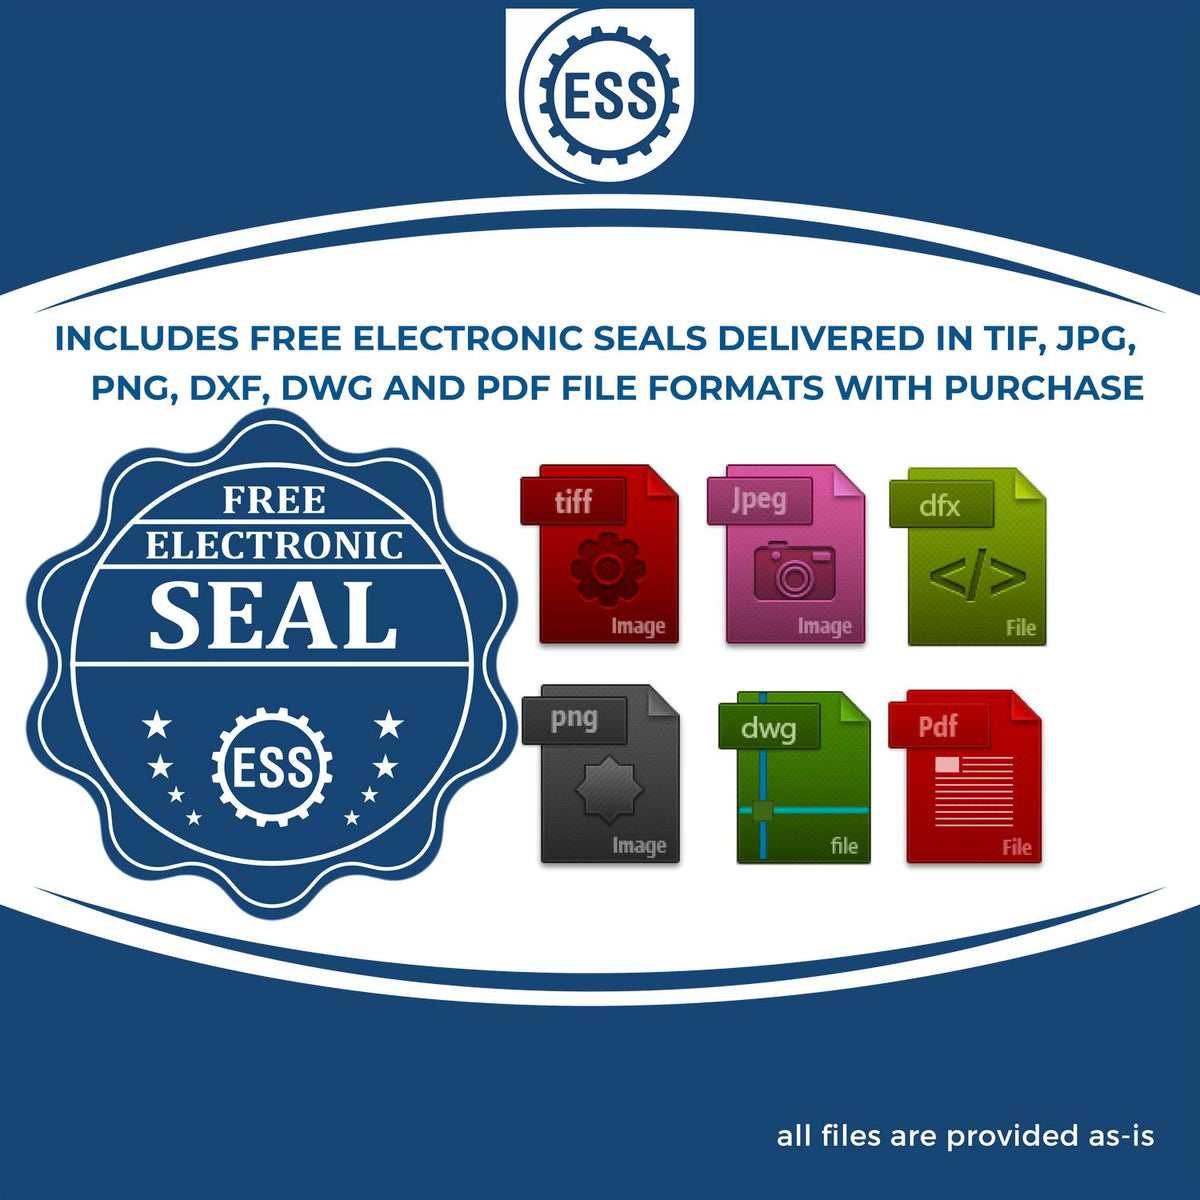 An infographic for the free electronic seal for the Heavy Duty Cast Iron Nebraska Engineer Seal Embosser illustrating the different file type icons such as DXF, DWG, TIF, JPG and PNG.